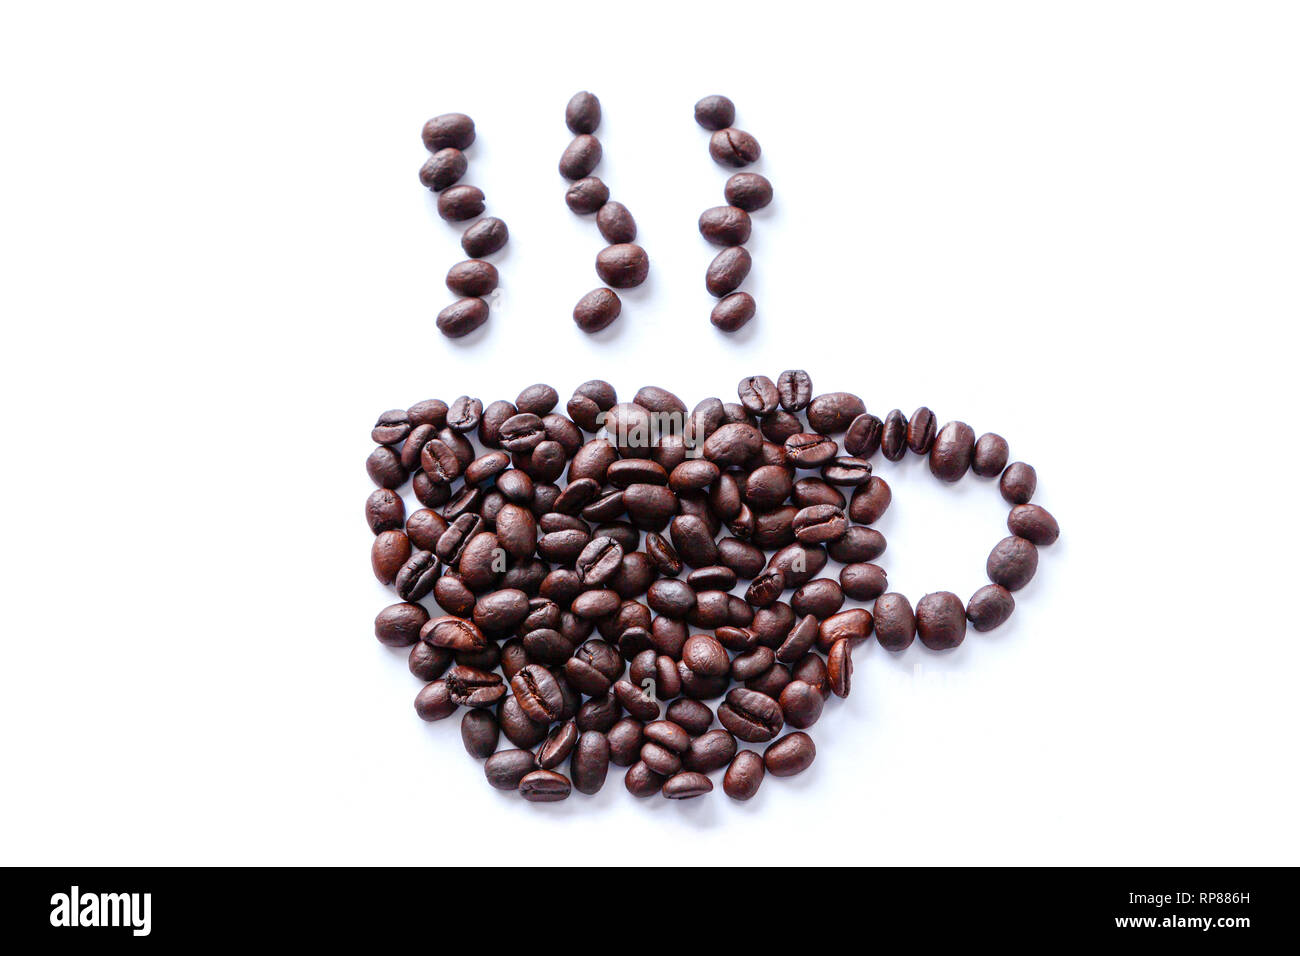 Roasted coffee beans scattered into a shape of a cup with rising steam. Isolated on white background. Stock Photo